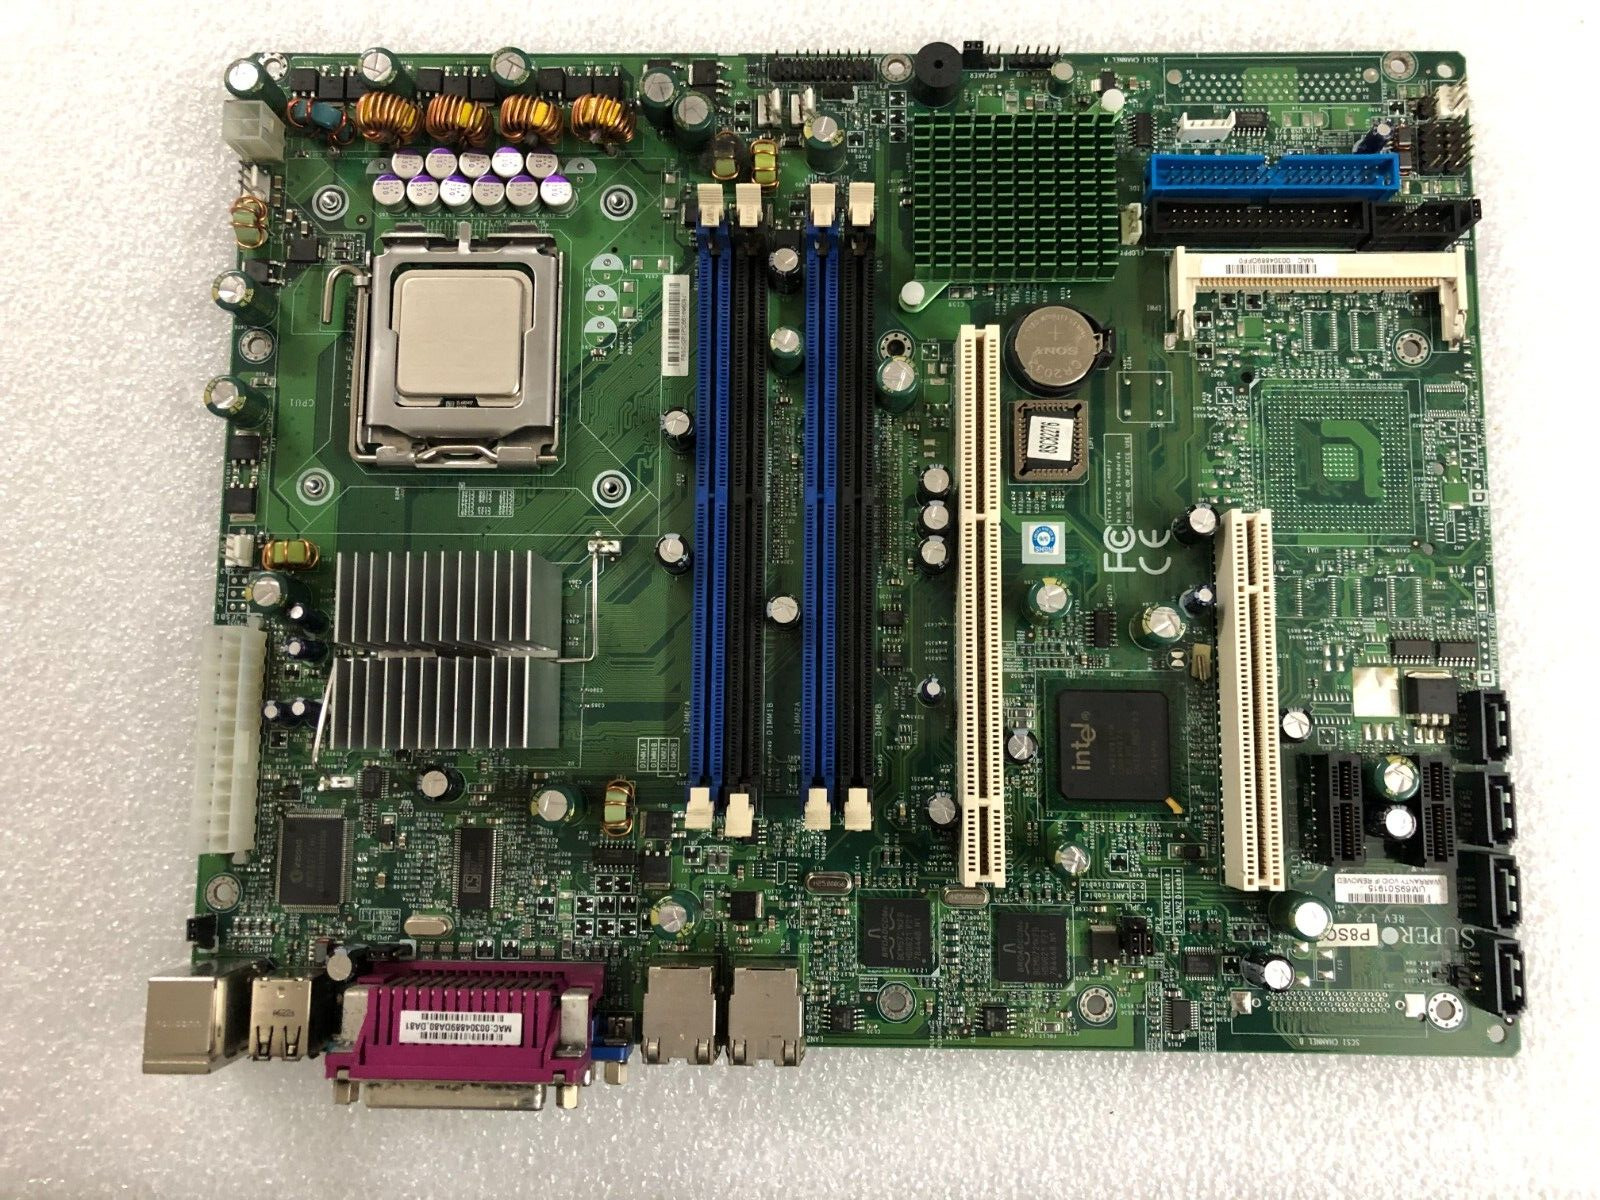 SuperMicro P8SCI LGA775 ATX MotherBoard With 3.0GHz CPU